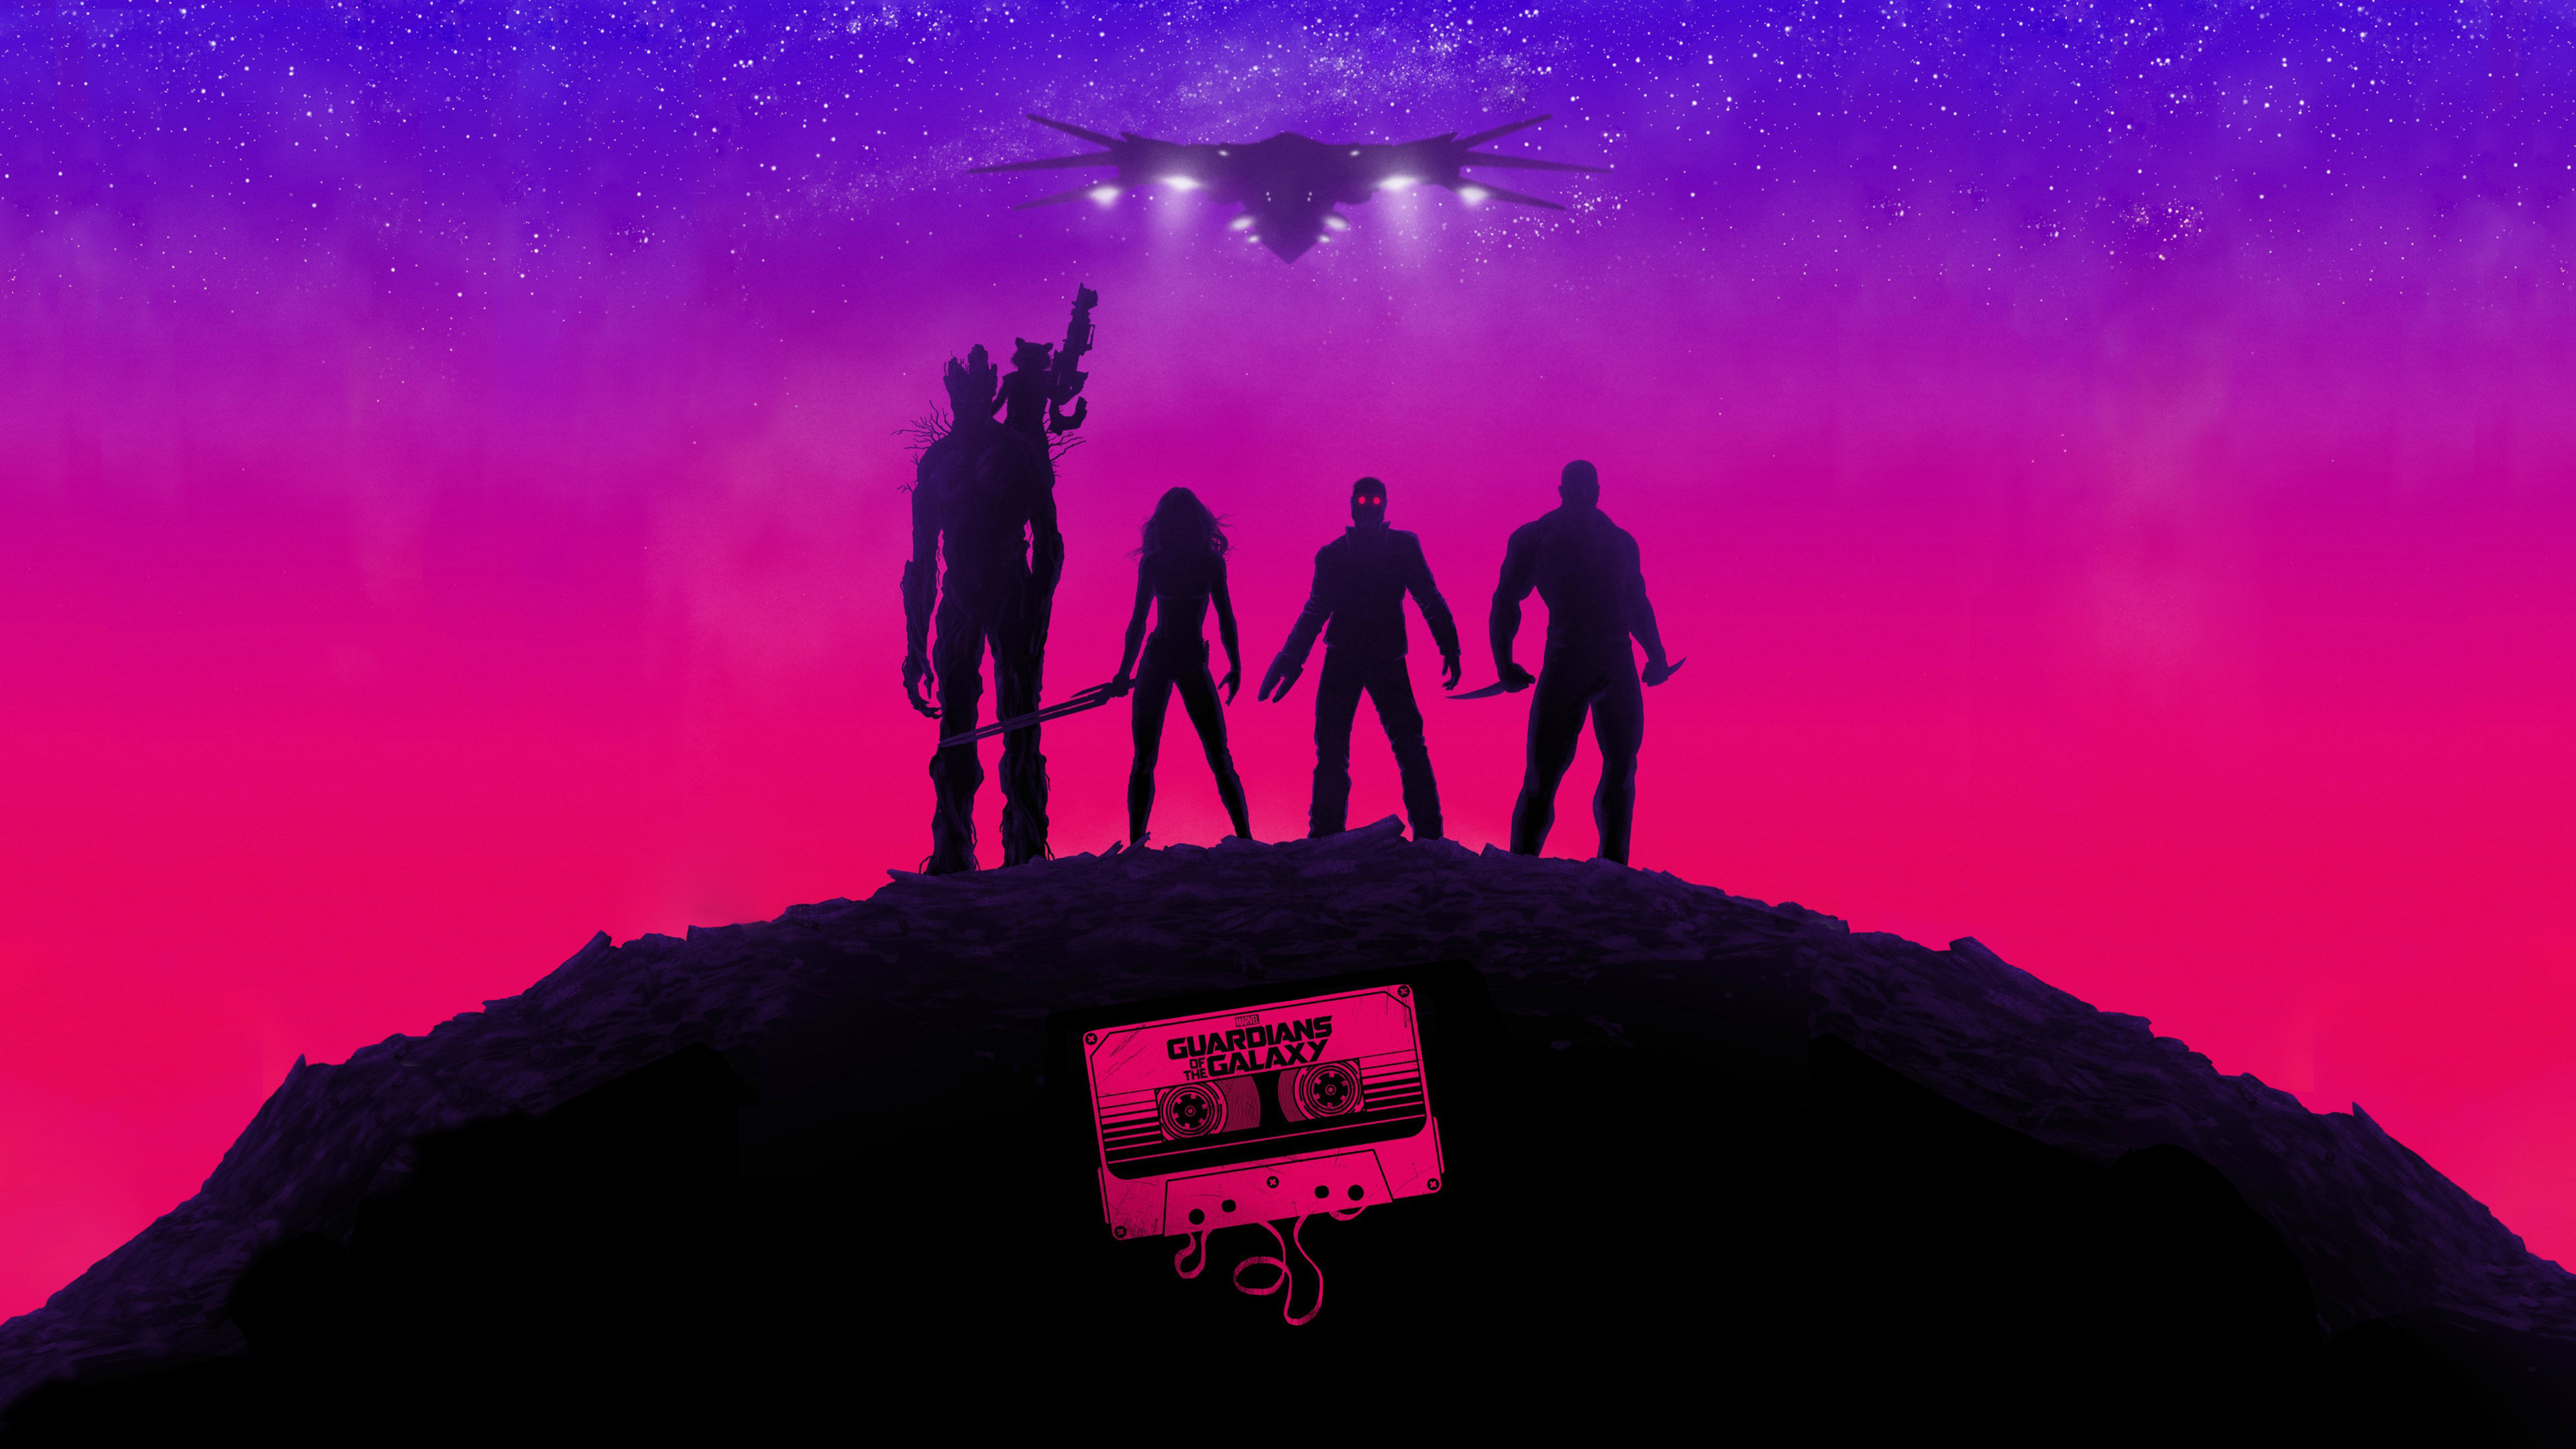 3840x2160 Guardians of the Galaxy wallpaper that I modded from one of the posters ...